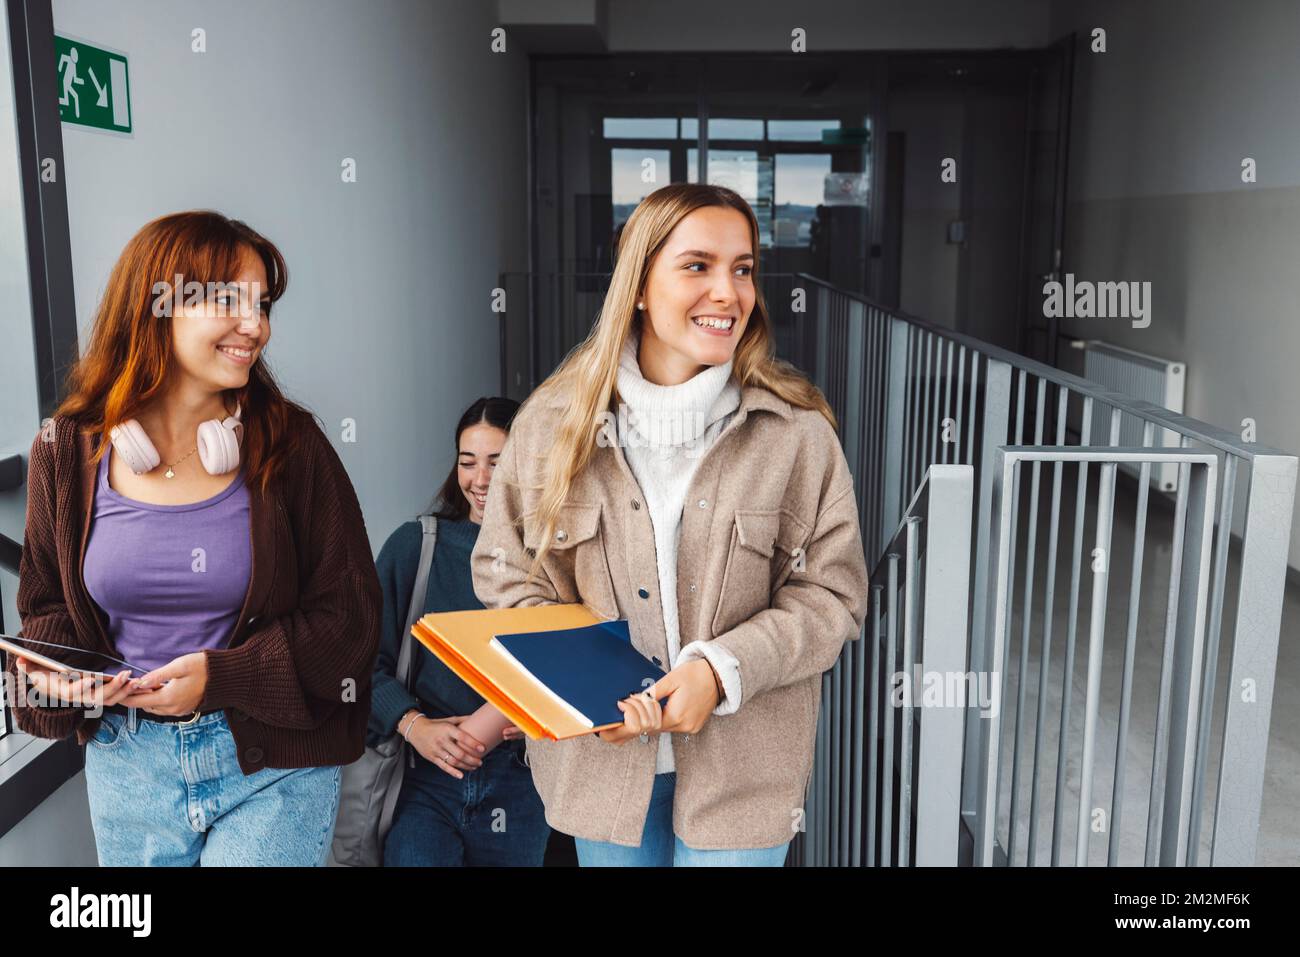 Group of friends, thre young woman laughing while walking in the college dorm Stock Photo